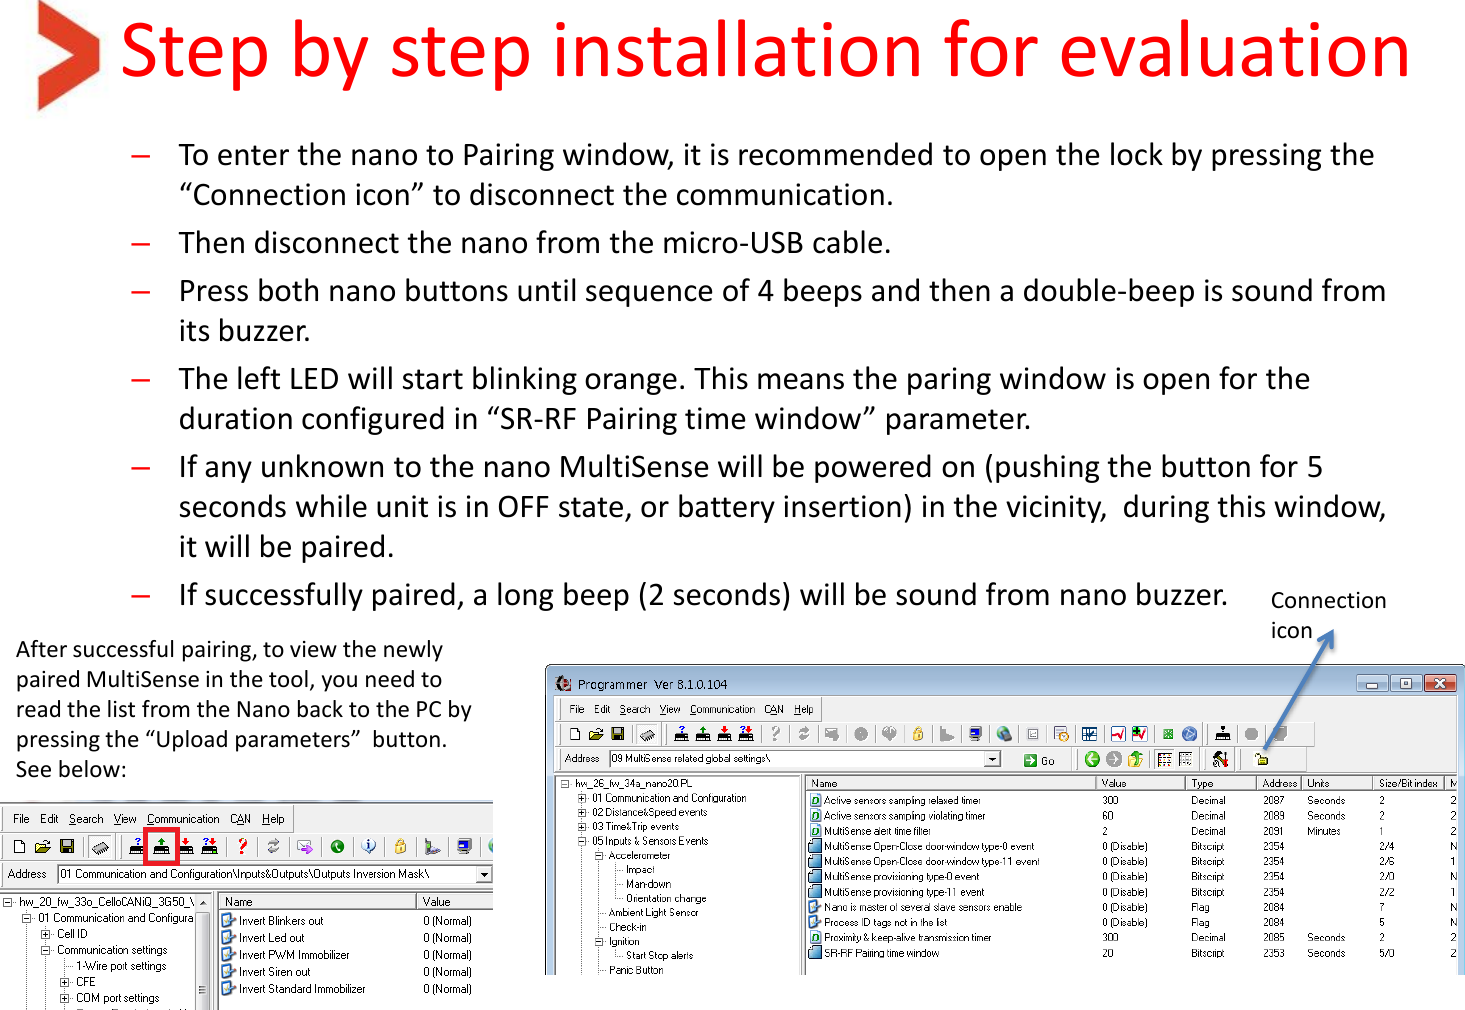 Step by step installation for evaluation –To enter the nano to Pairing window, it is recommended to open the lock by pressing the “Connection icon” to disconnect the communication. –Then disconnect the nano from the micro-USB cable. –Press both nano buttons until sequence of 4 beeps and then a double-beep is sound from its buzzer. –The left LED will start blinking orange. This means the paring window is open for the duration configured in “SR-RF Pairing time window” parameter. –If any unknown to the nano MultiSense will be powered on (pushing the button for 5 seconds while unit is in OFF state, or battery insertion) in the vicinity,  during this window, it will be paired. –If successfully paired, a long beep (2 seconds) will be sound from nano buzzer.  Connection icon After successful pairing, to view the newly paired MultiSense in the tool, you need to read the list from the Nano back to the PC by pressing the “Upload parameters”  button. See below: 